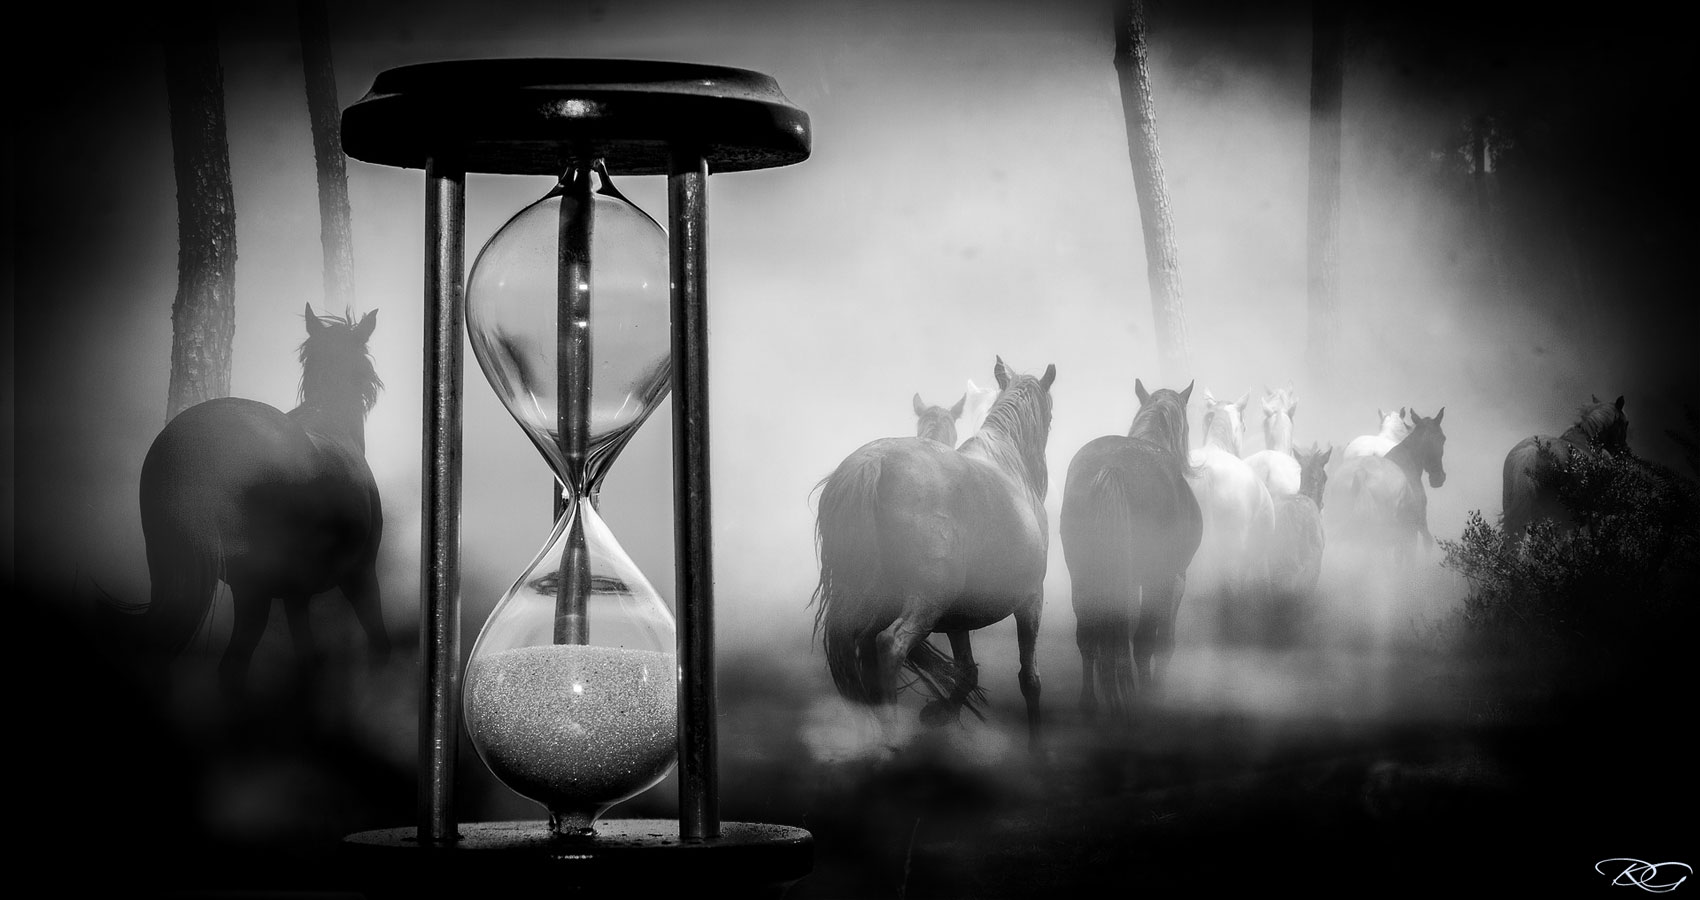 If We Had More Time, a poem by Doug Stanfield at Spillwords.com